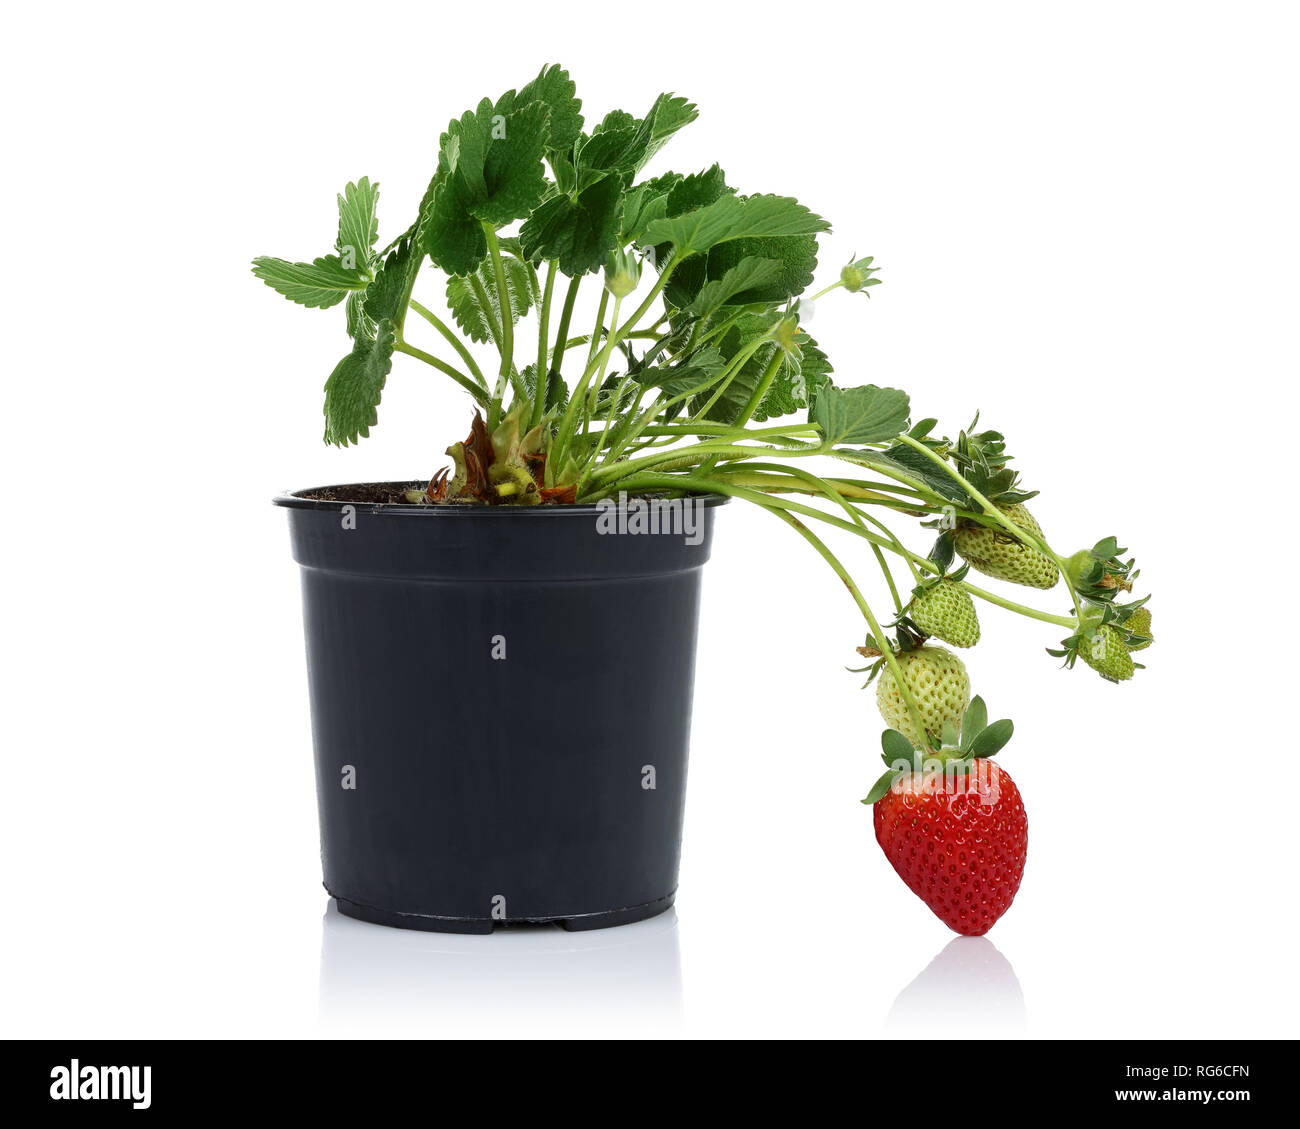 Strawberry plant with fruits in pot isolated on white background Stock Photo